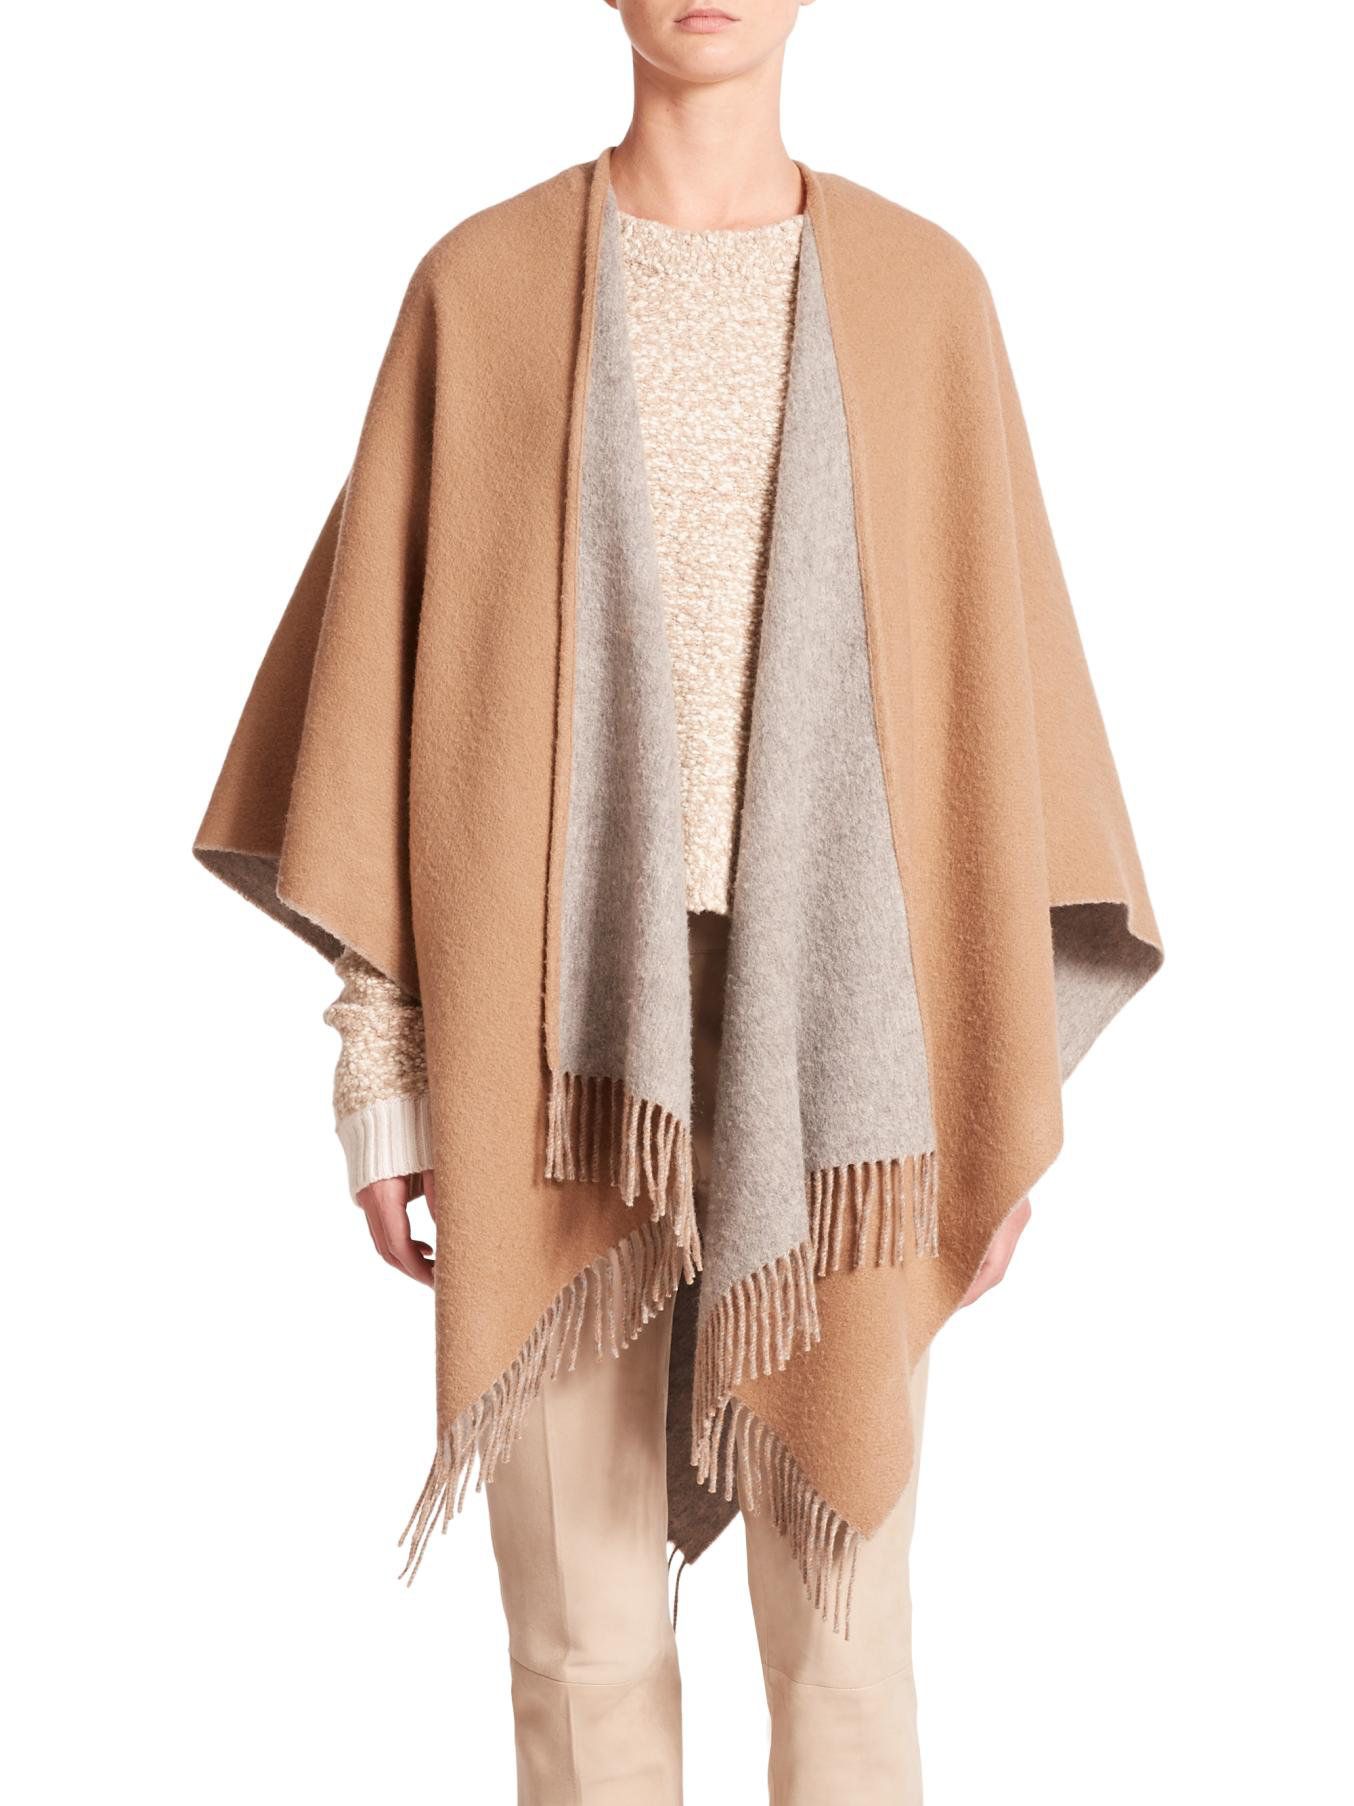 Lyst - Rag & Bone Double Face Wool Poncho in Natural